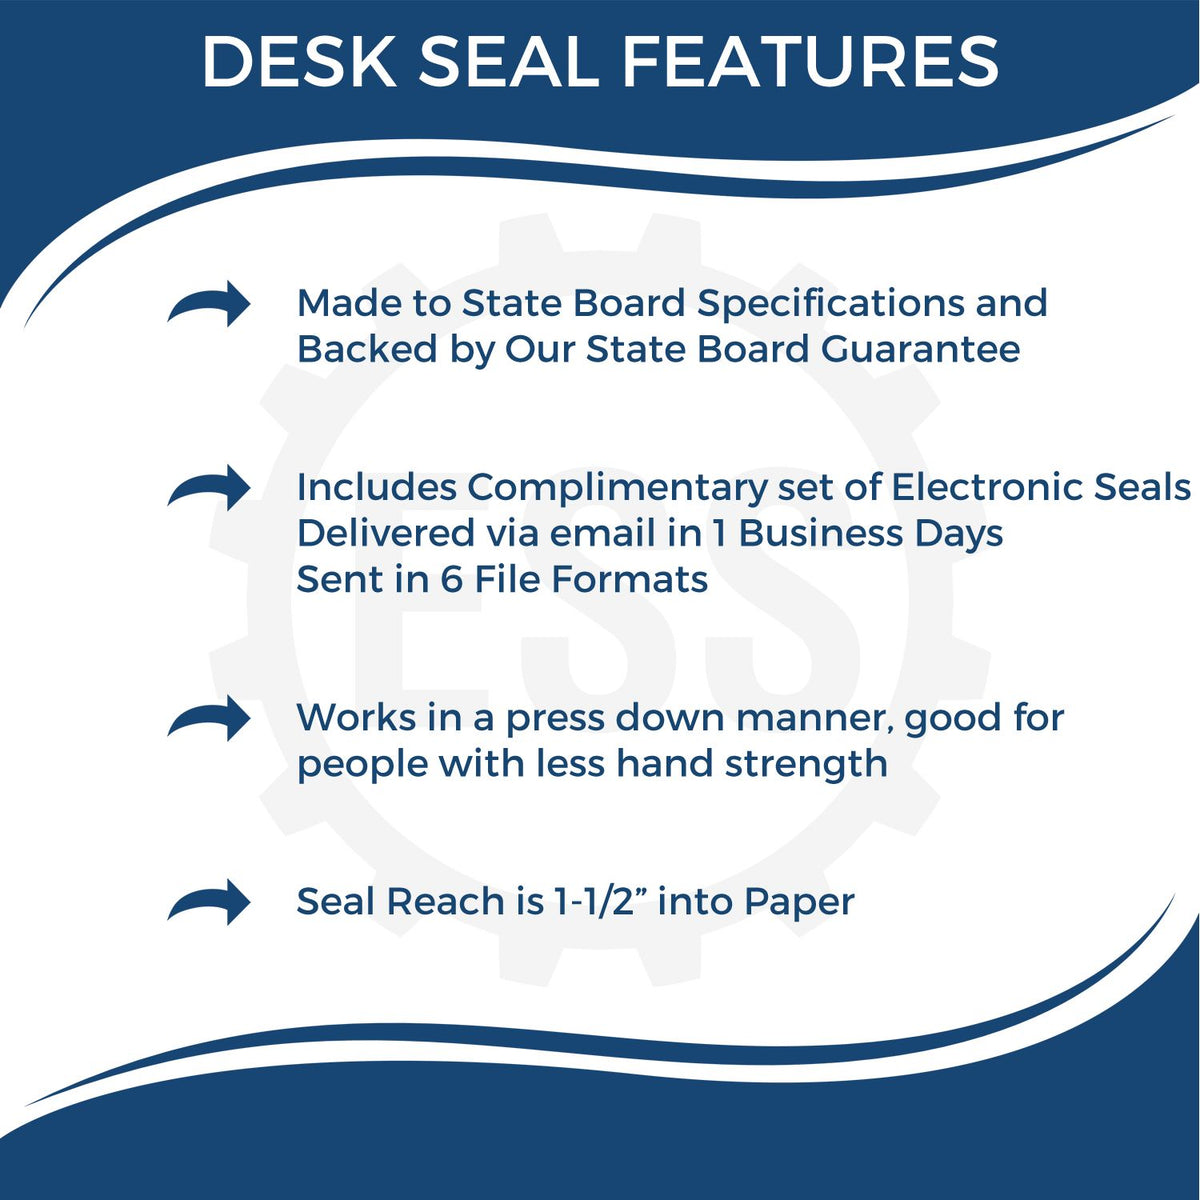 A picture of an infographic highlighting the selling points for the Indiana Geologist Desk Seal